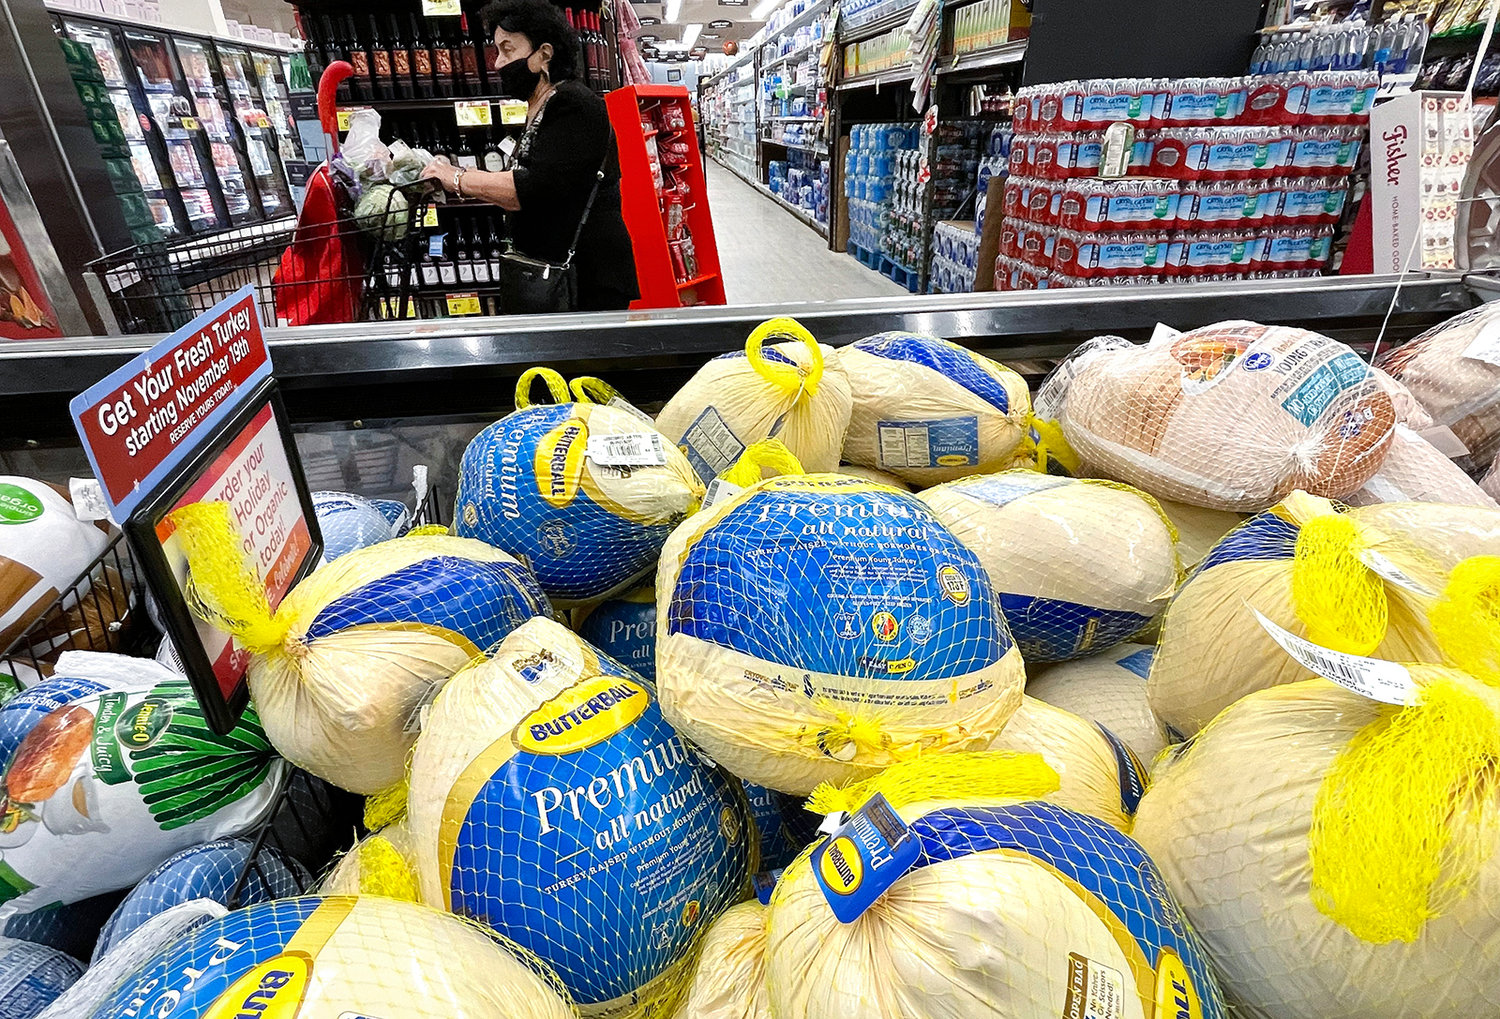 Turkeys are displayed for sale in a grocery store ahead of the Thanksgiving holiday on Nov. 11, 2021 in Los Angeles, California. (Mario Tama/Getty Images/TNS)